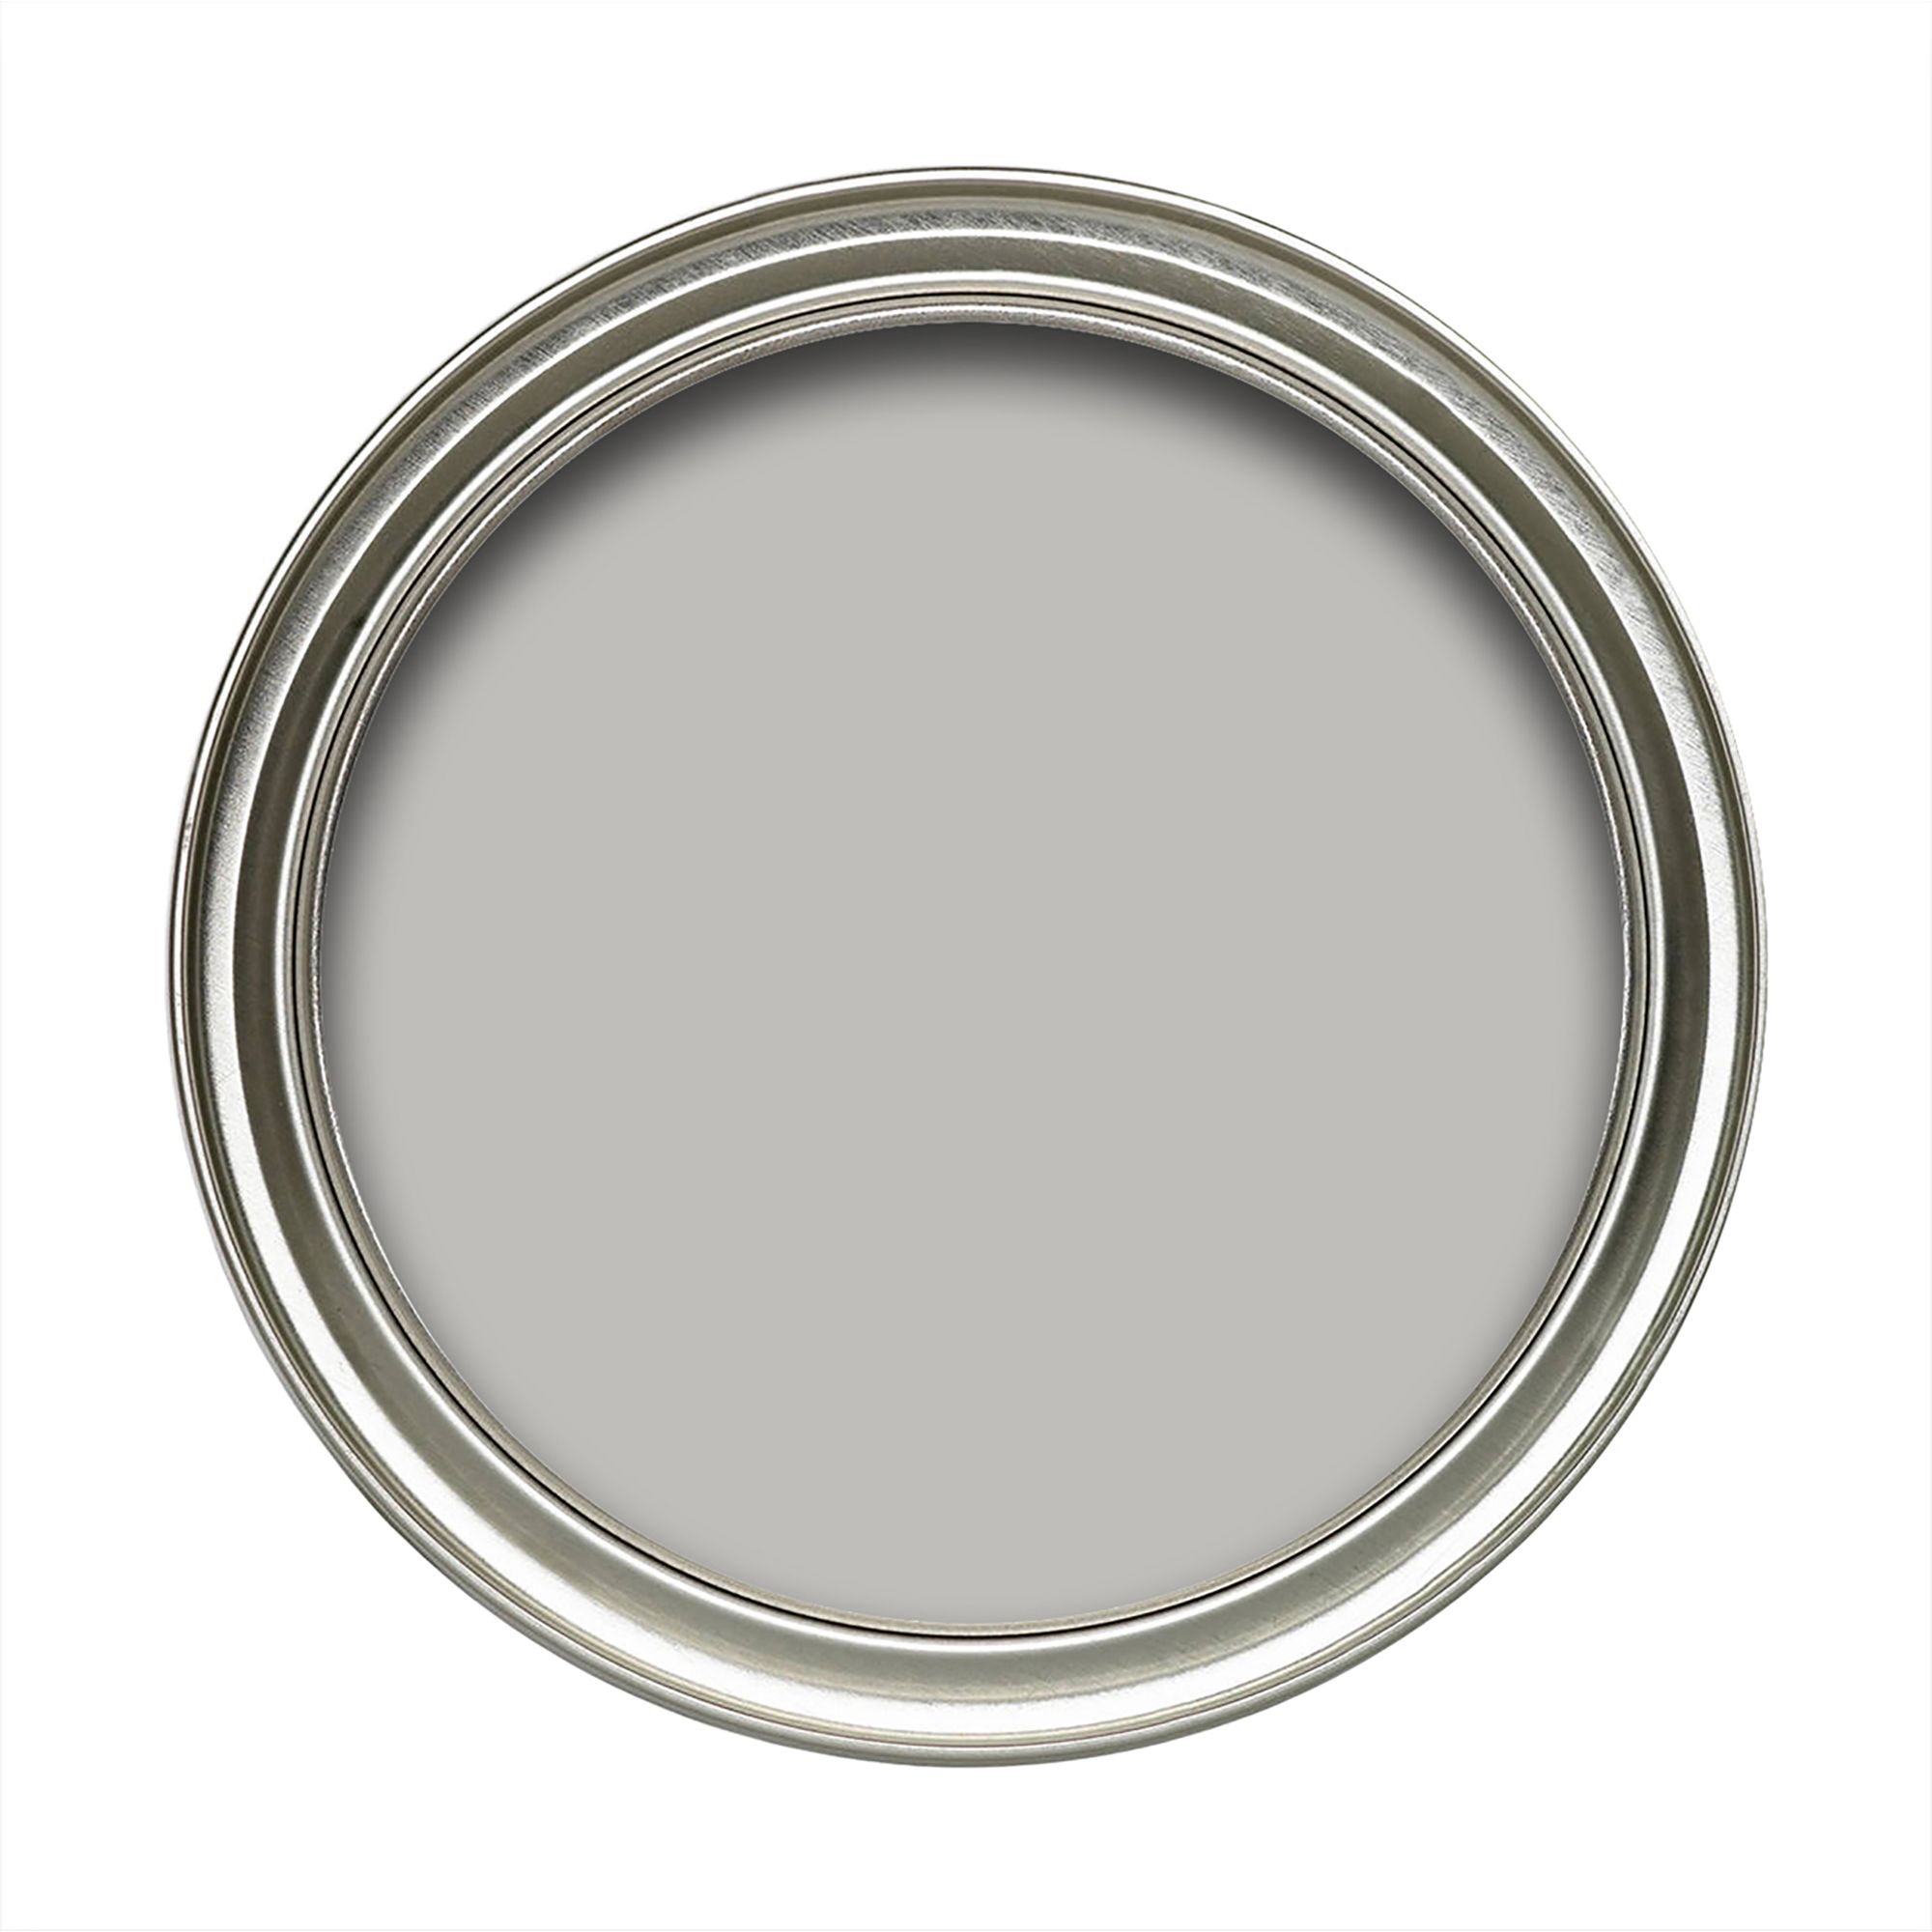 Dulux Everyday Colours Tranquil grey Soft sheen Emulsion paint, 10L